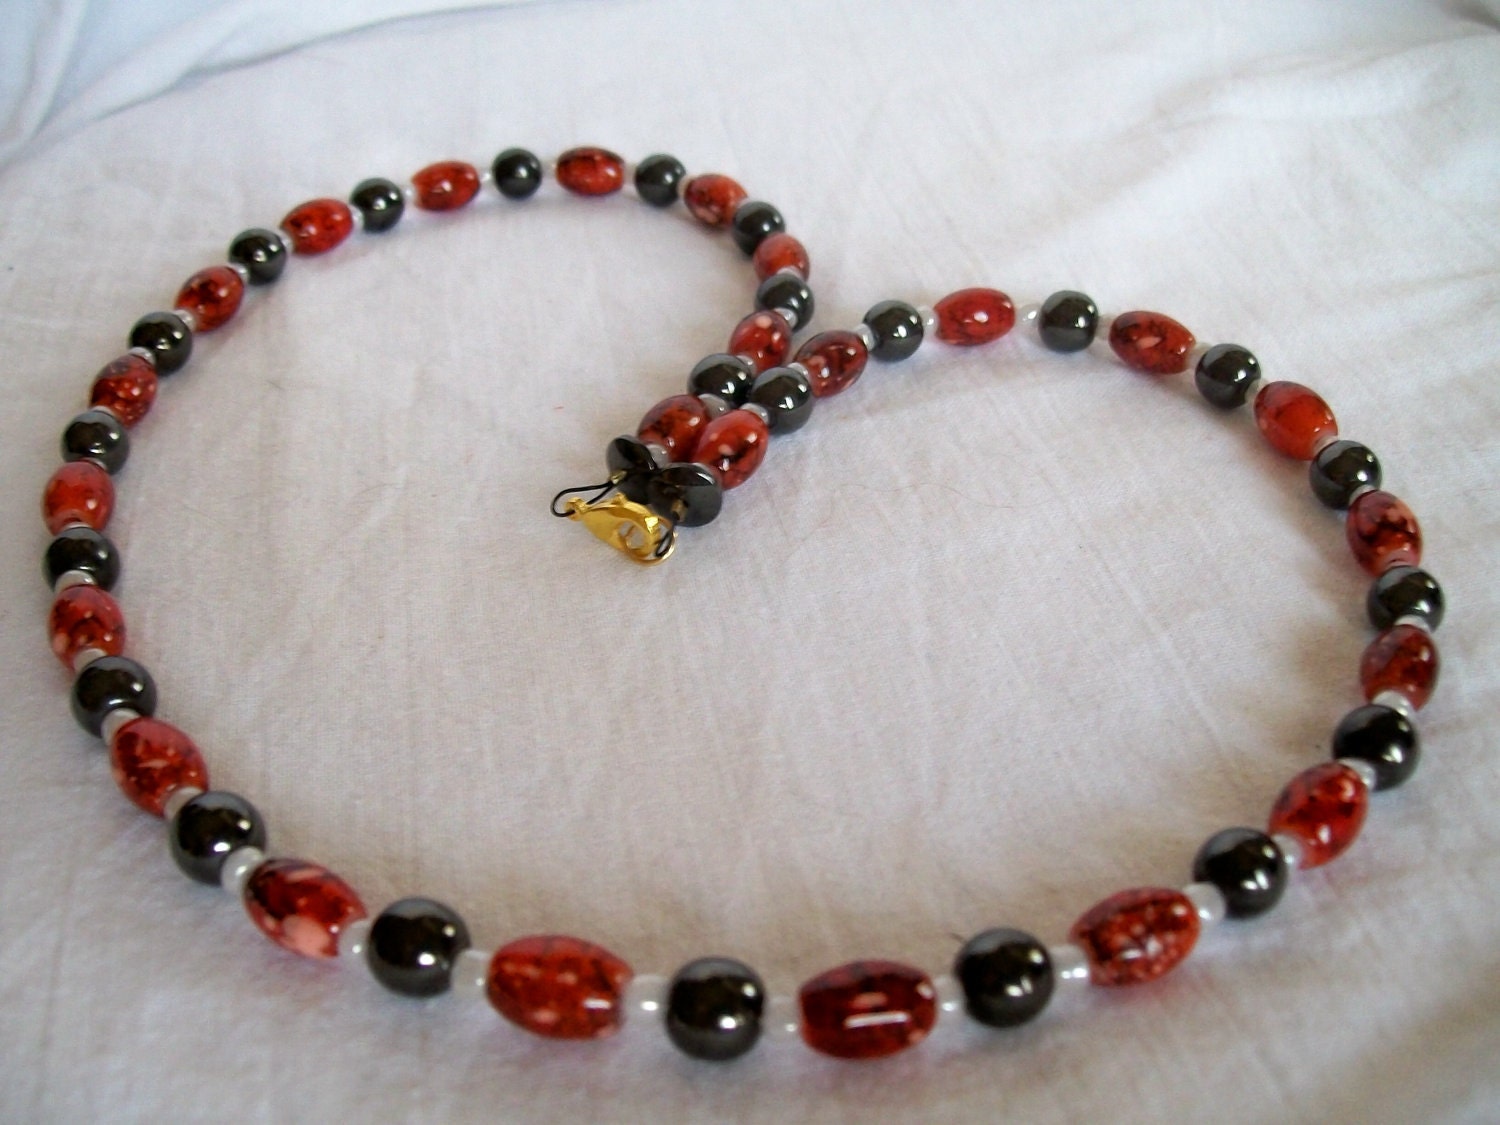 MAGNET NECKLACE of Red Acrylic Beads and Dark Grey Magnet Beads - JypsyJewels